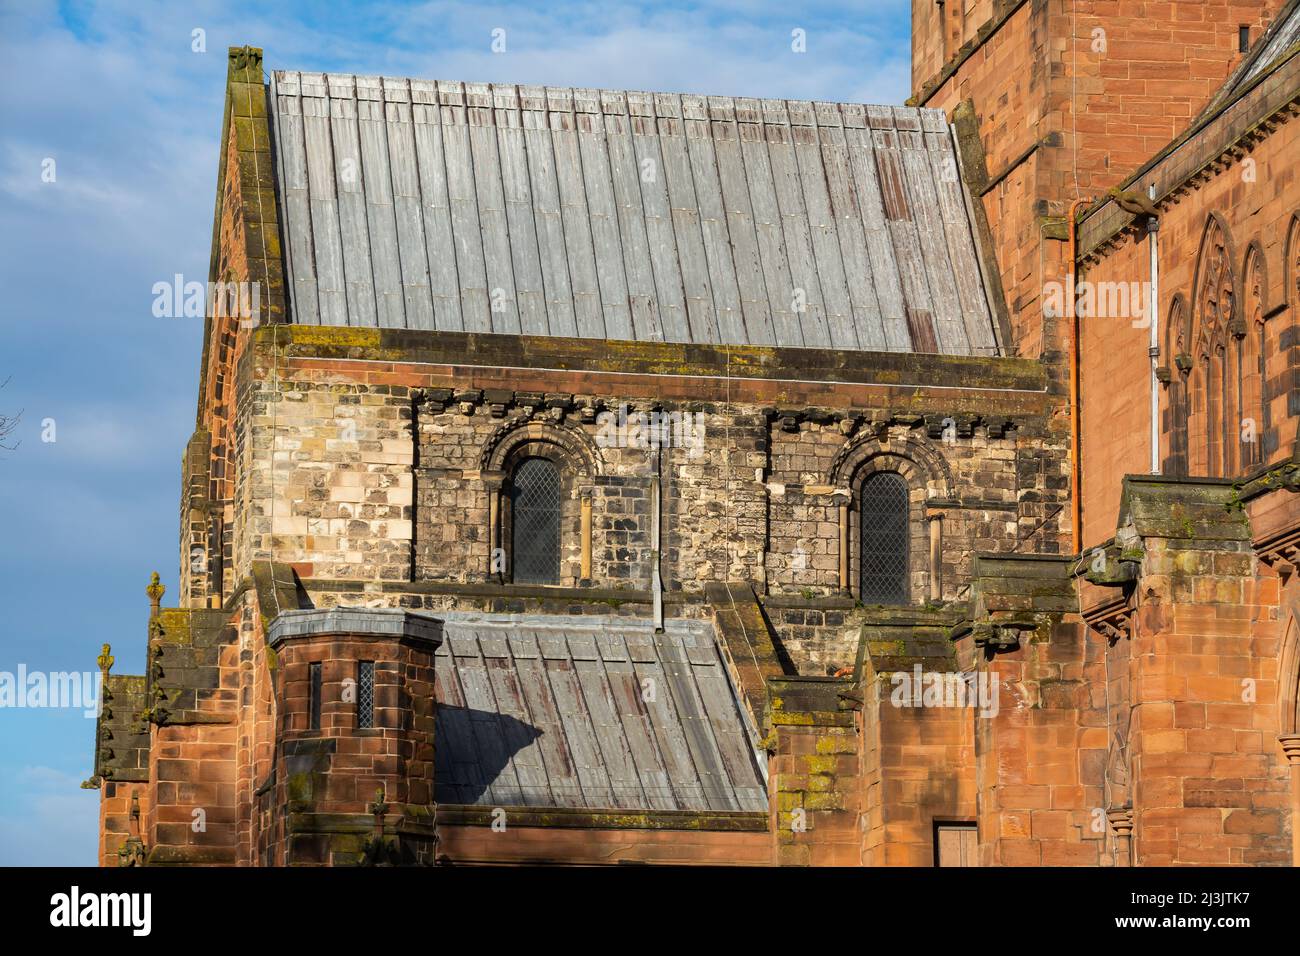 Exterior of old Cathedral in a town center on a beautiful Spring morning.  Carlisle, England. Stock Photo